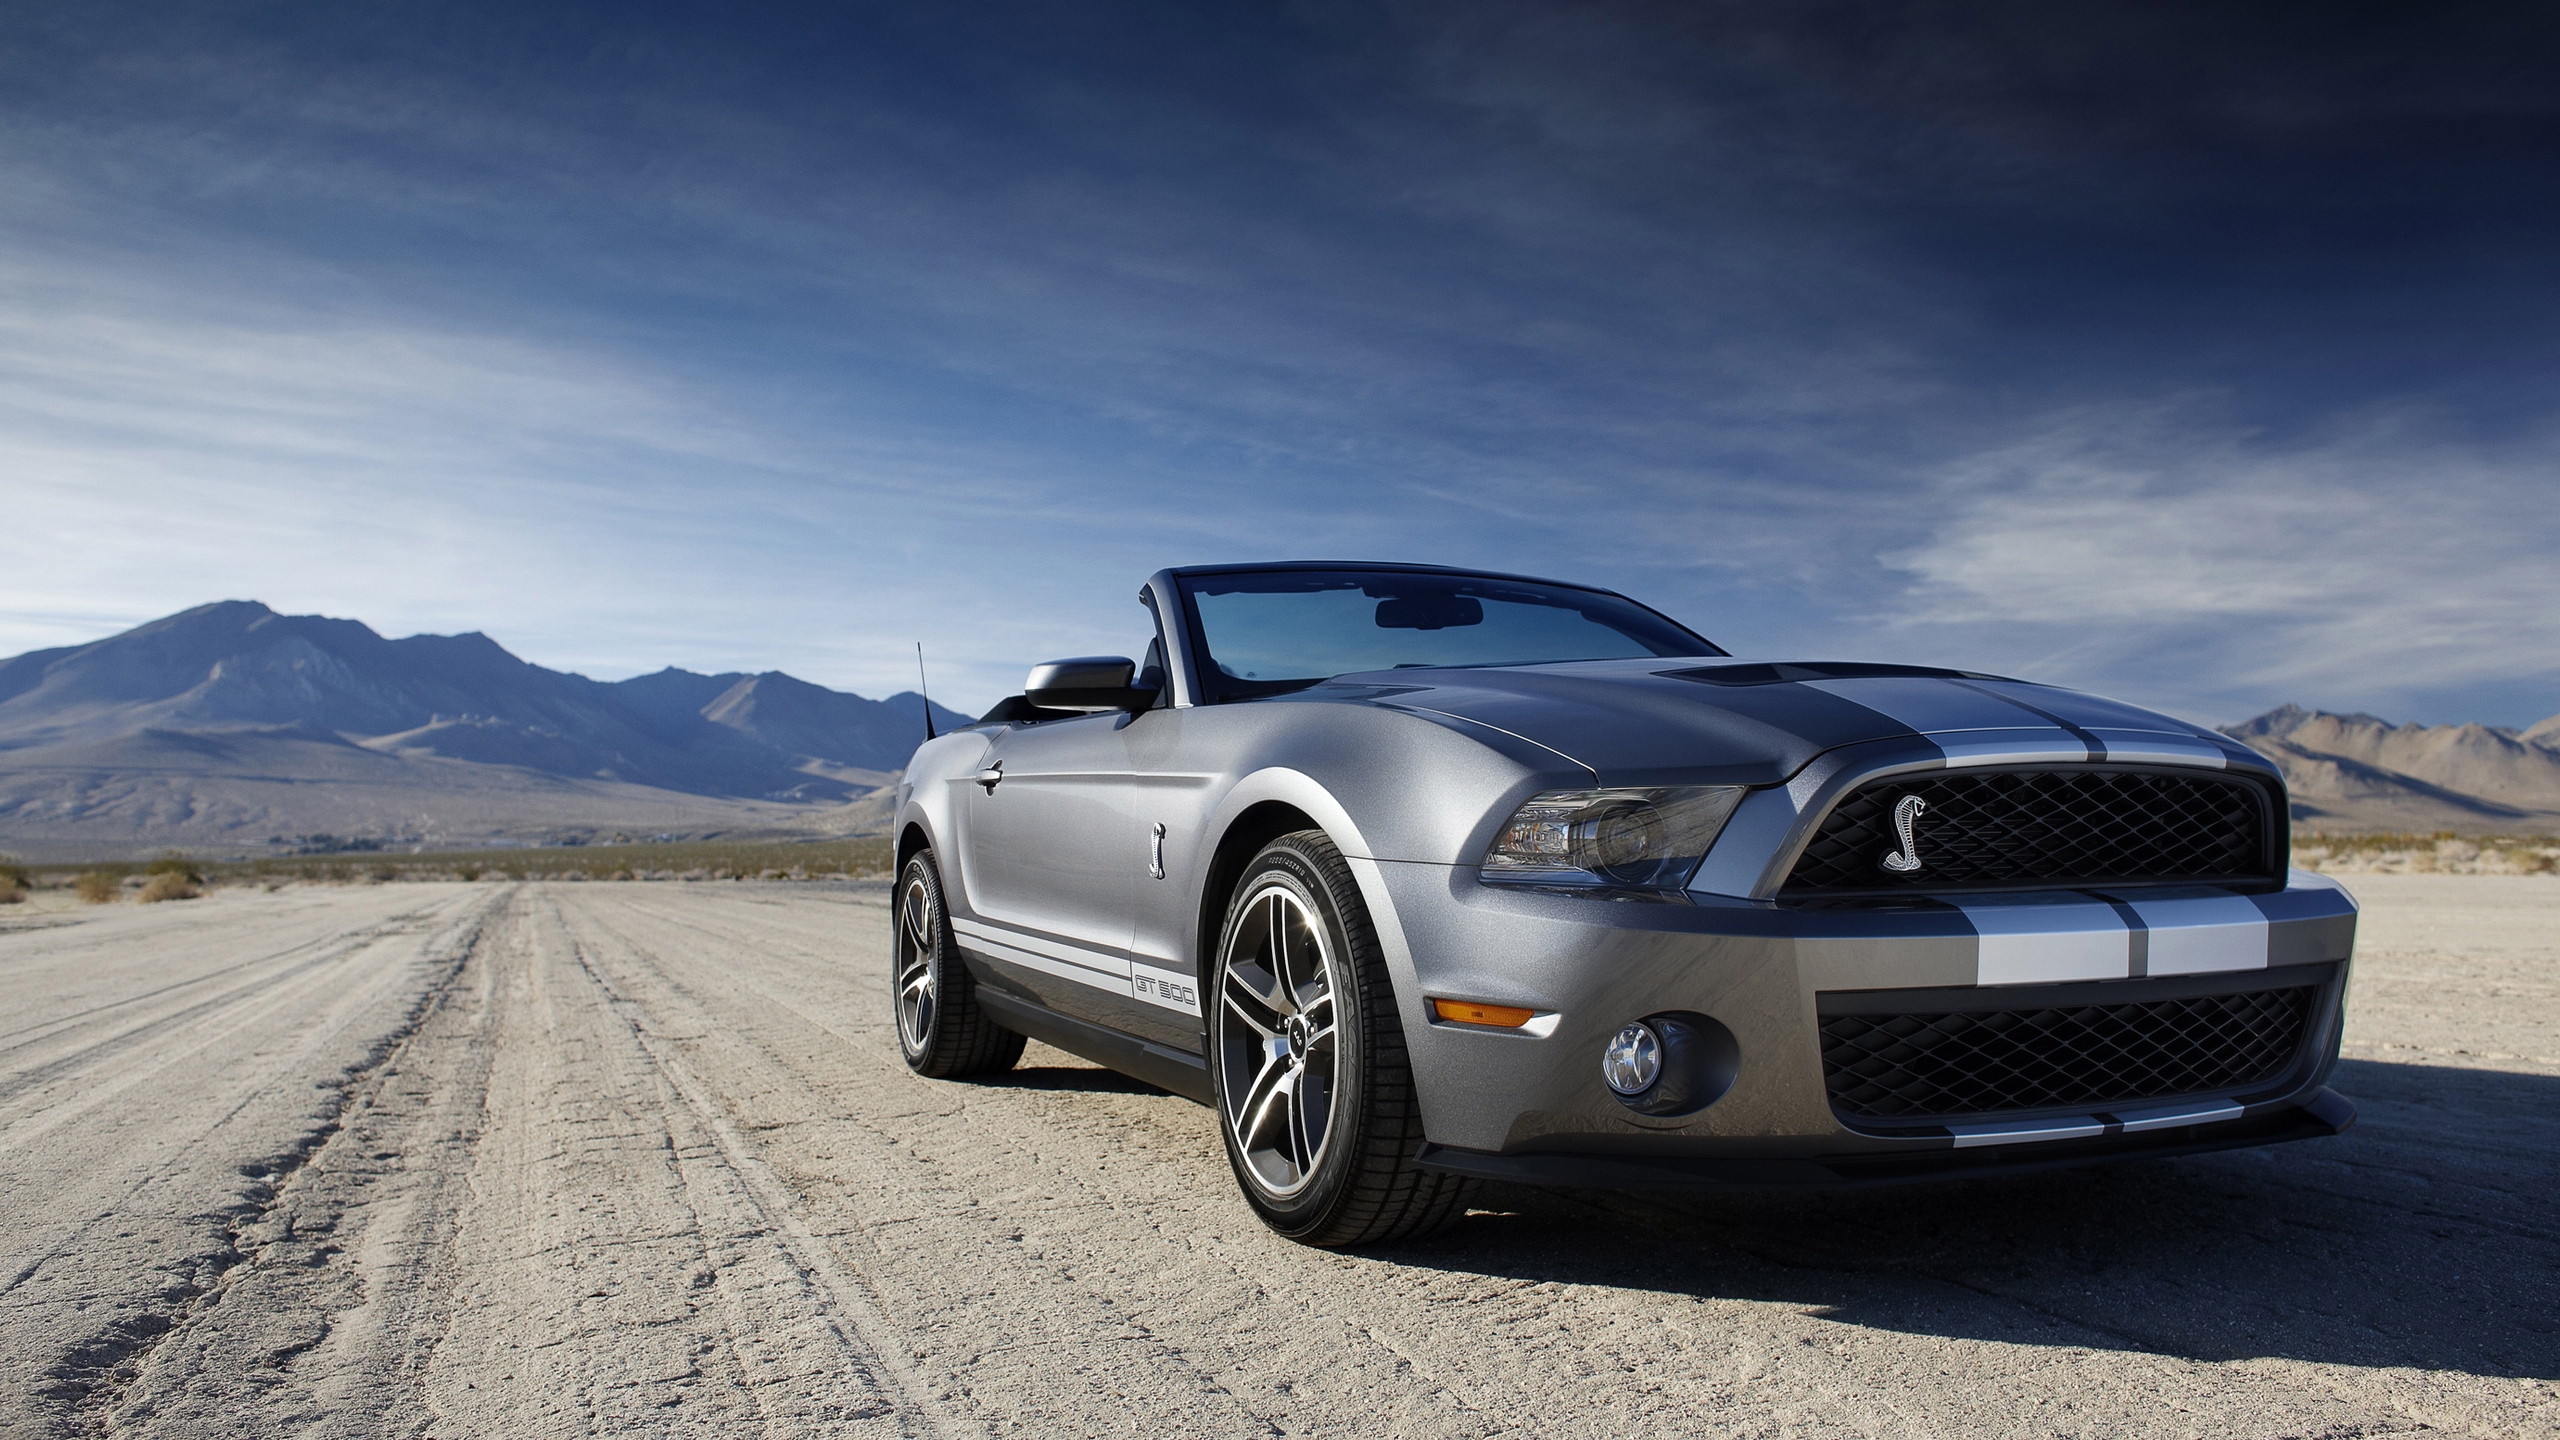 Ford Mustang Shelby for 2560x1440 HDTV resolution